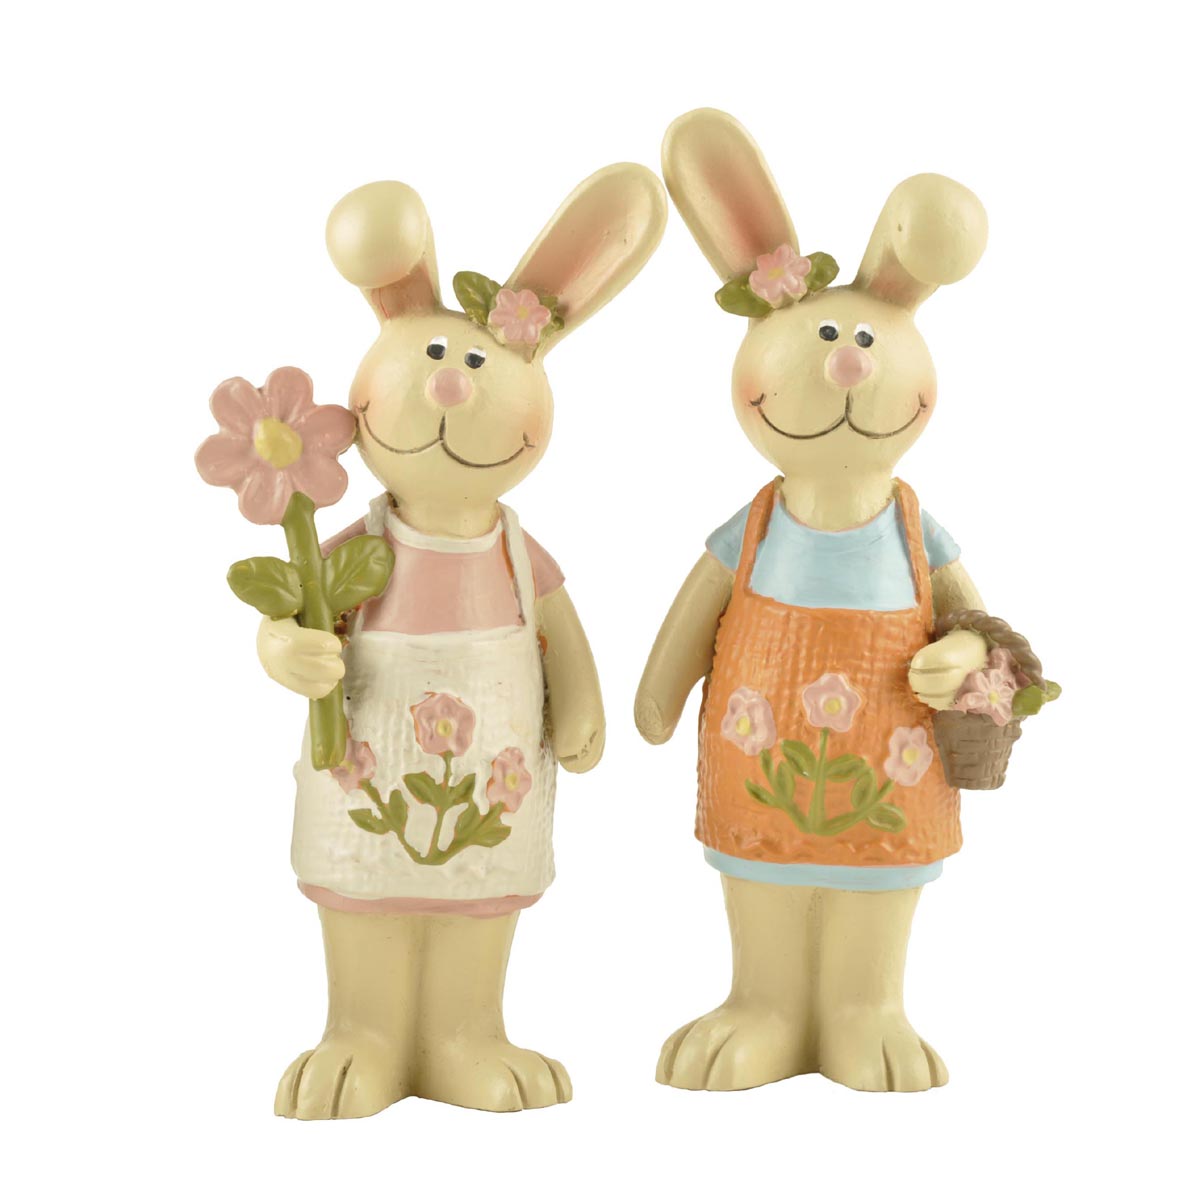 Ennas decorative easter rabbit decor for holiday gift-2